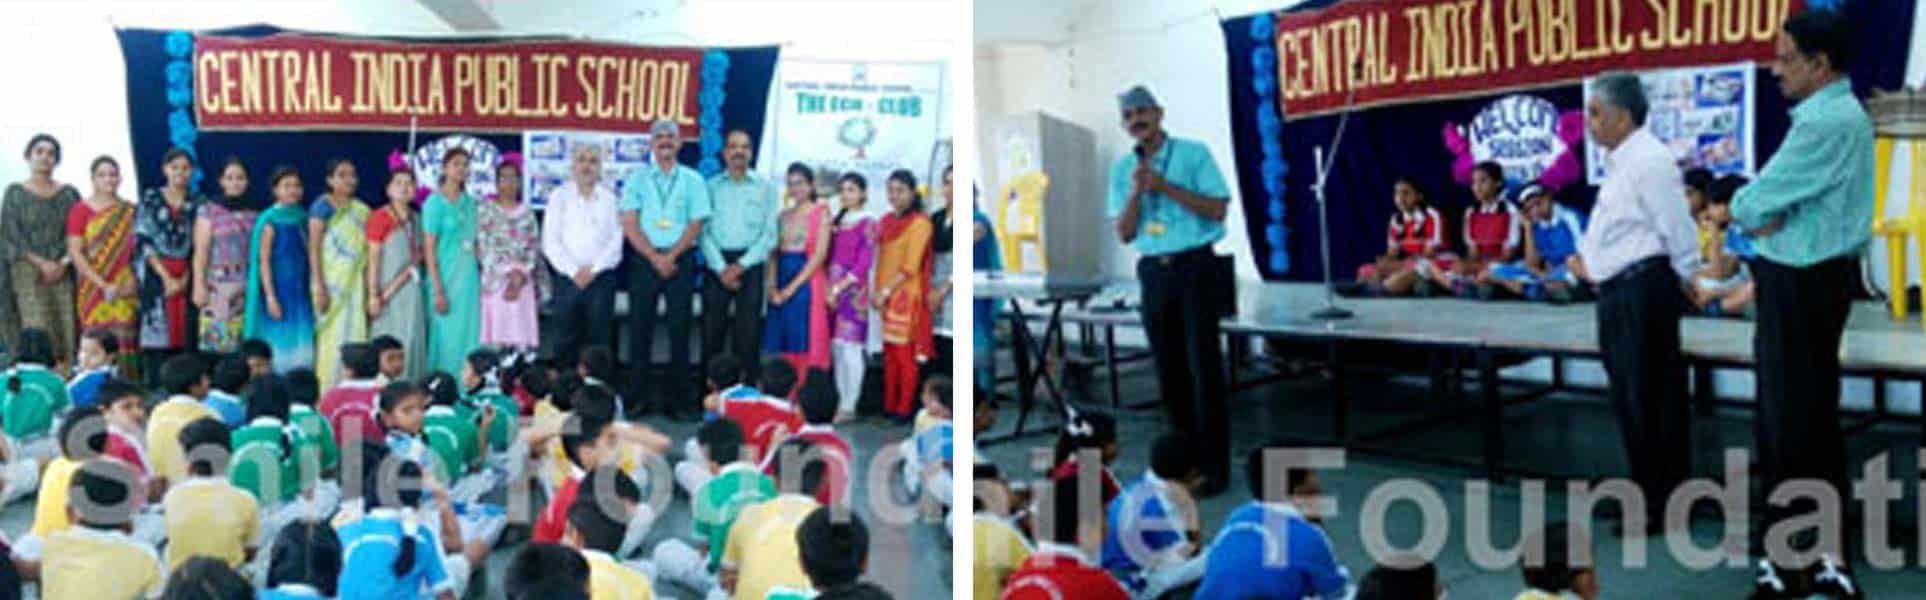 CFC value education session at Central India Public School